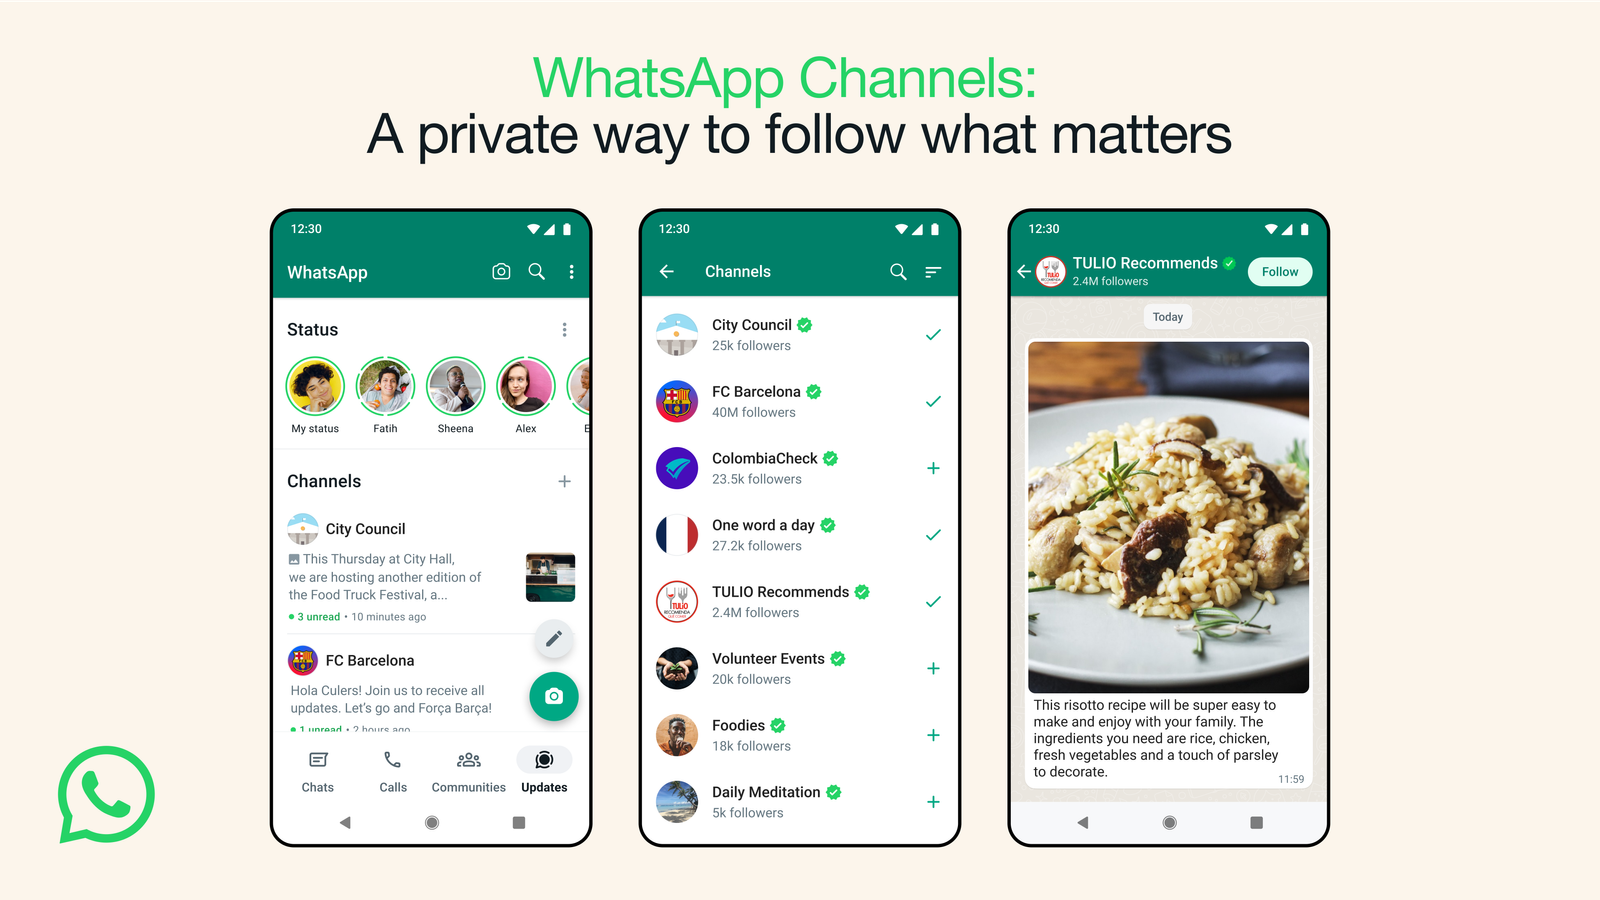 Mark Zuckerberg announces WhatsApp Channels, a private way to follow what matters